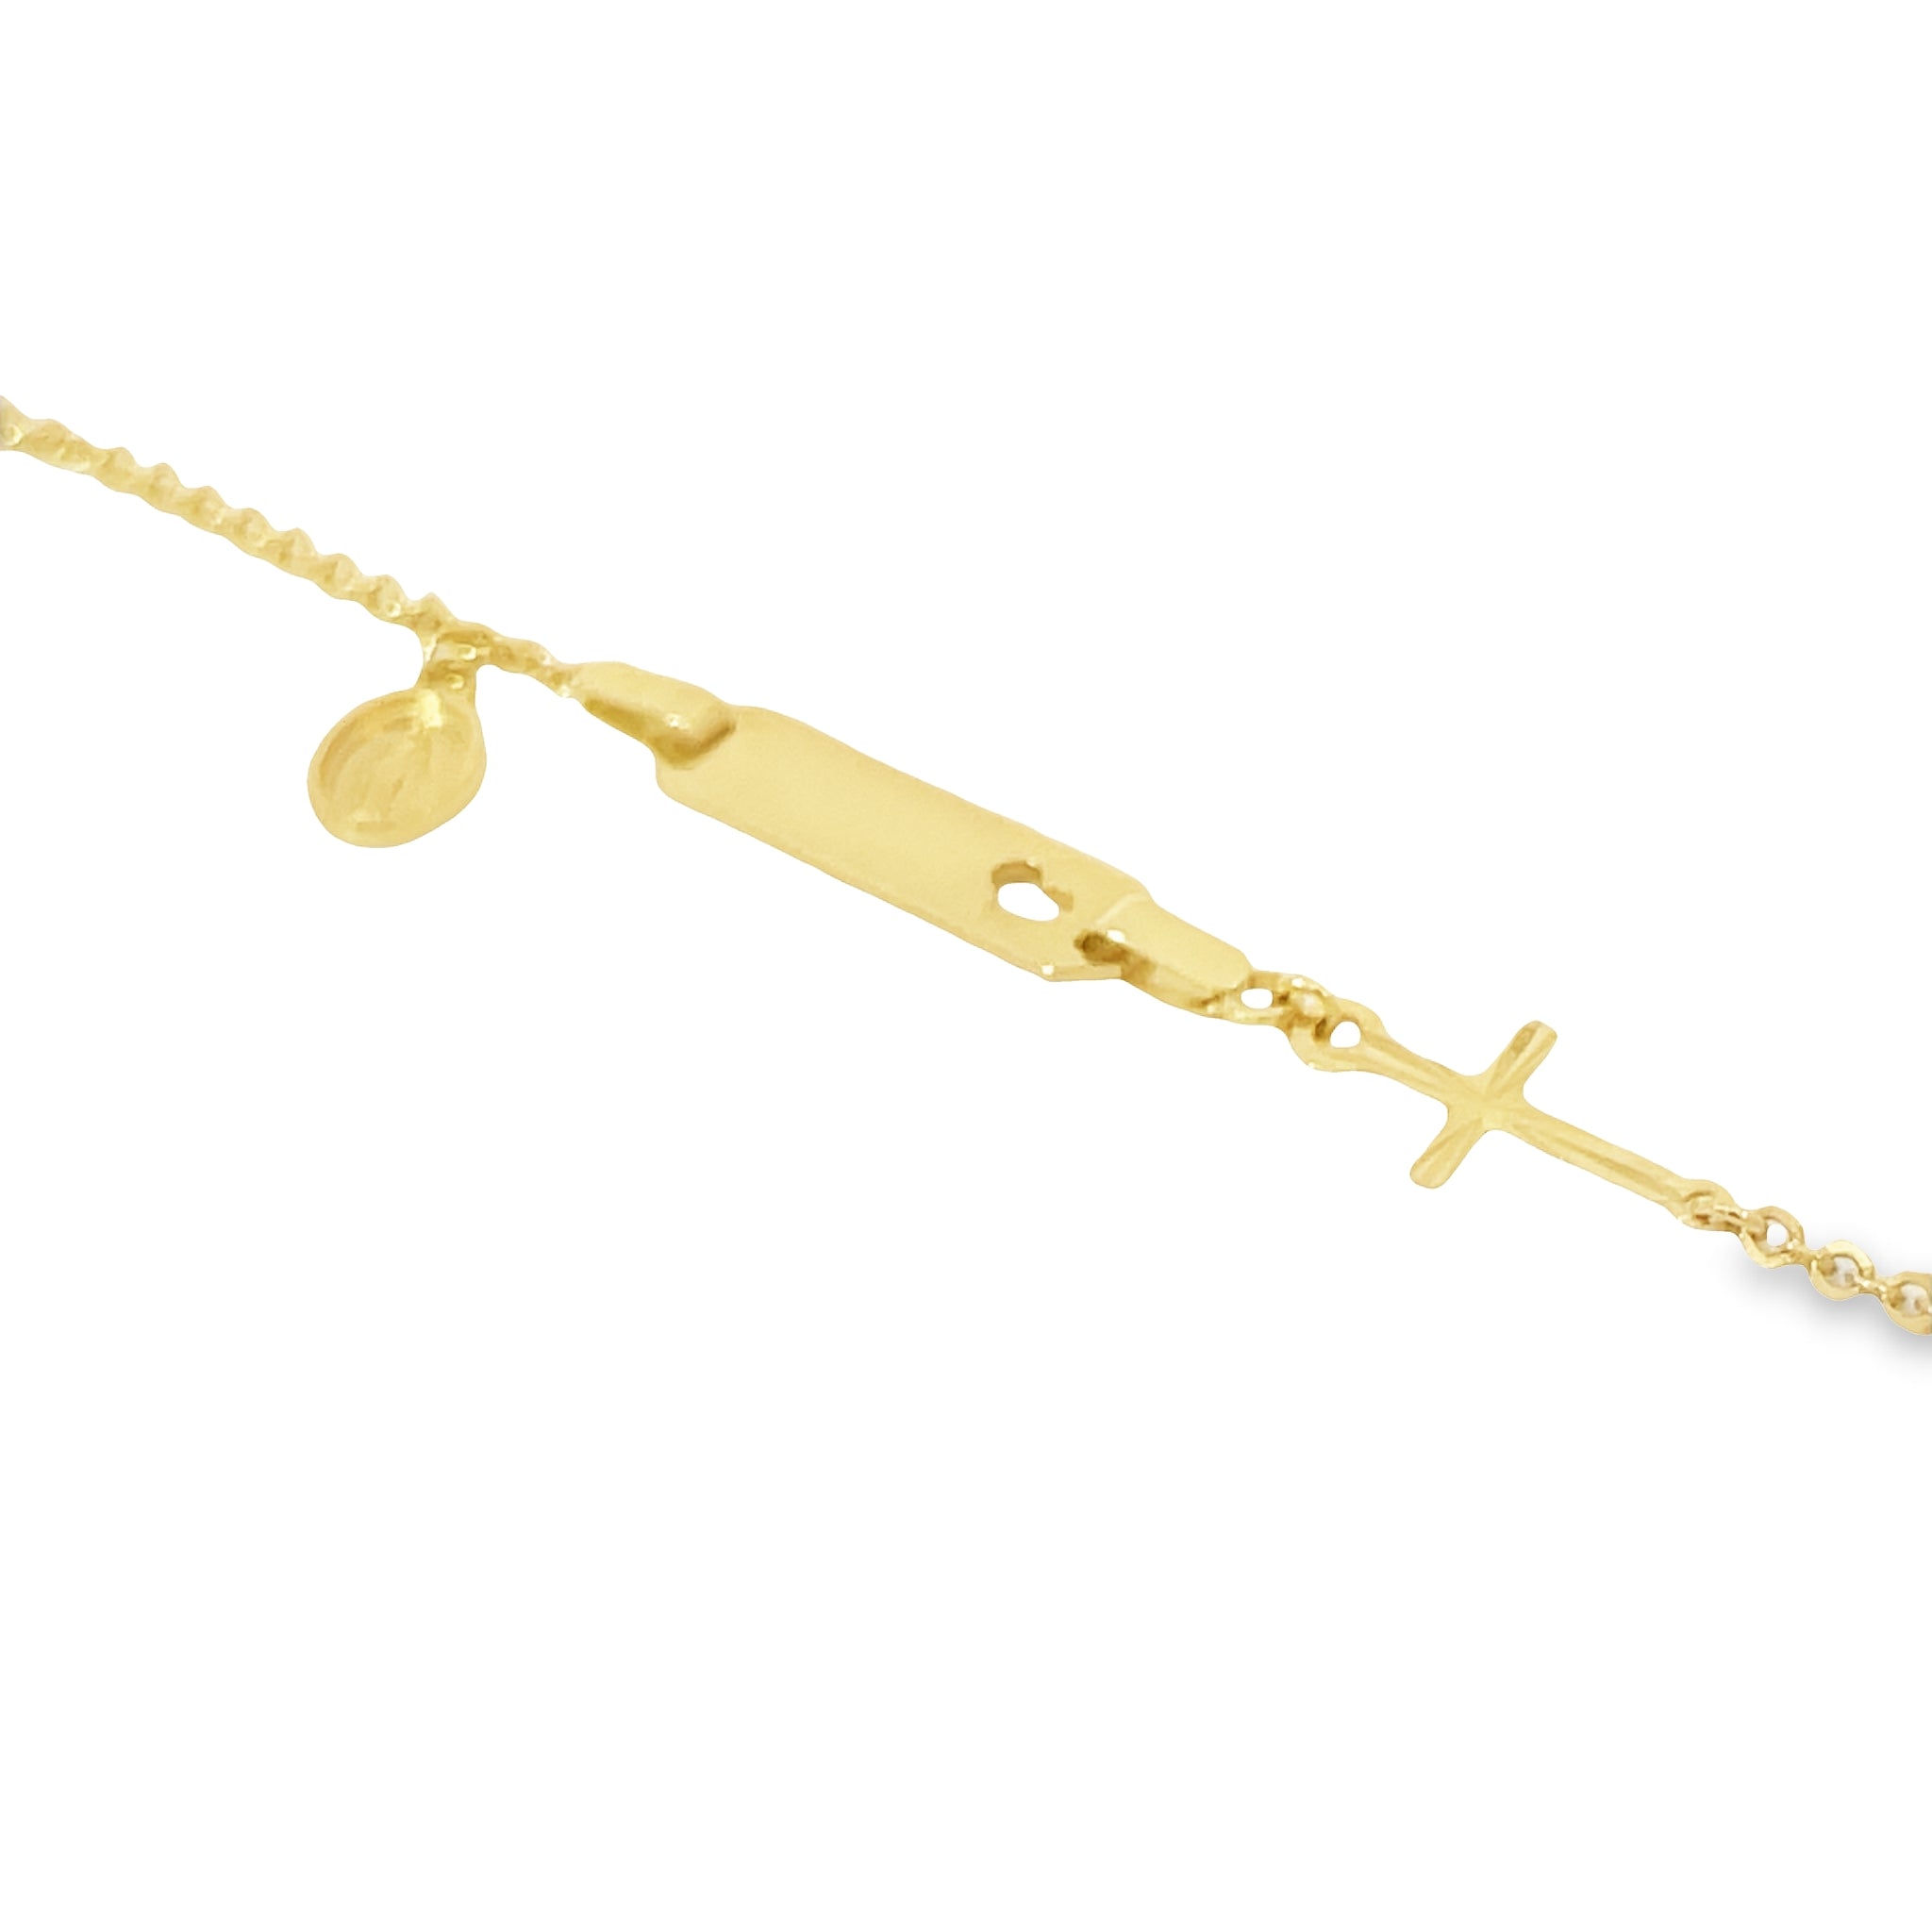 This beautifully crafted 14k yellow gold children's bracelet will make your little one feel special. Features include an elegant ID bar with a heart-cut out for an extra touch of love, a sideways cross and Miraculous Medal charm adding an element of faith. One size fits most children 6" long. Show your love with this beautiful piece!